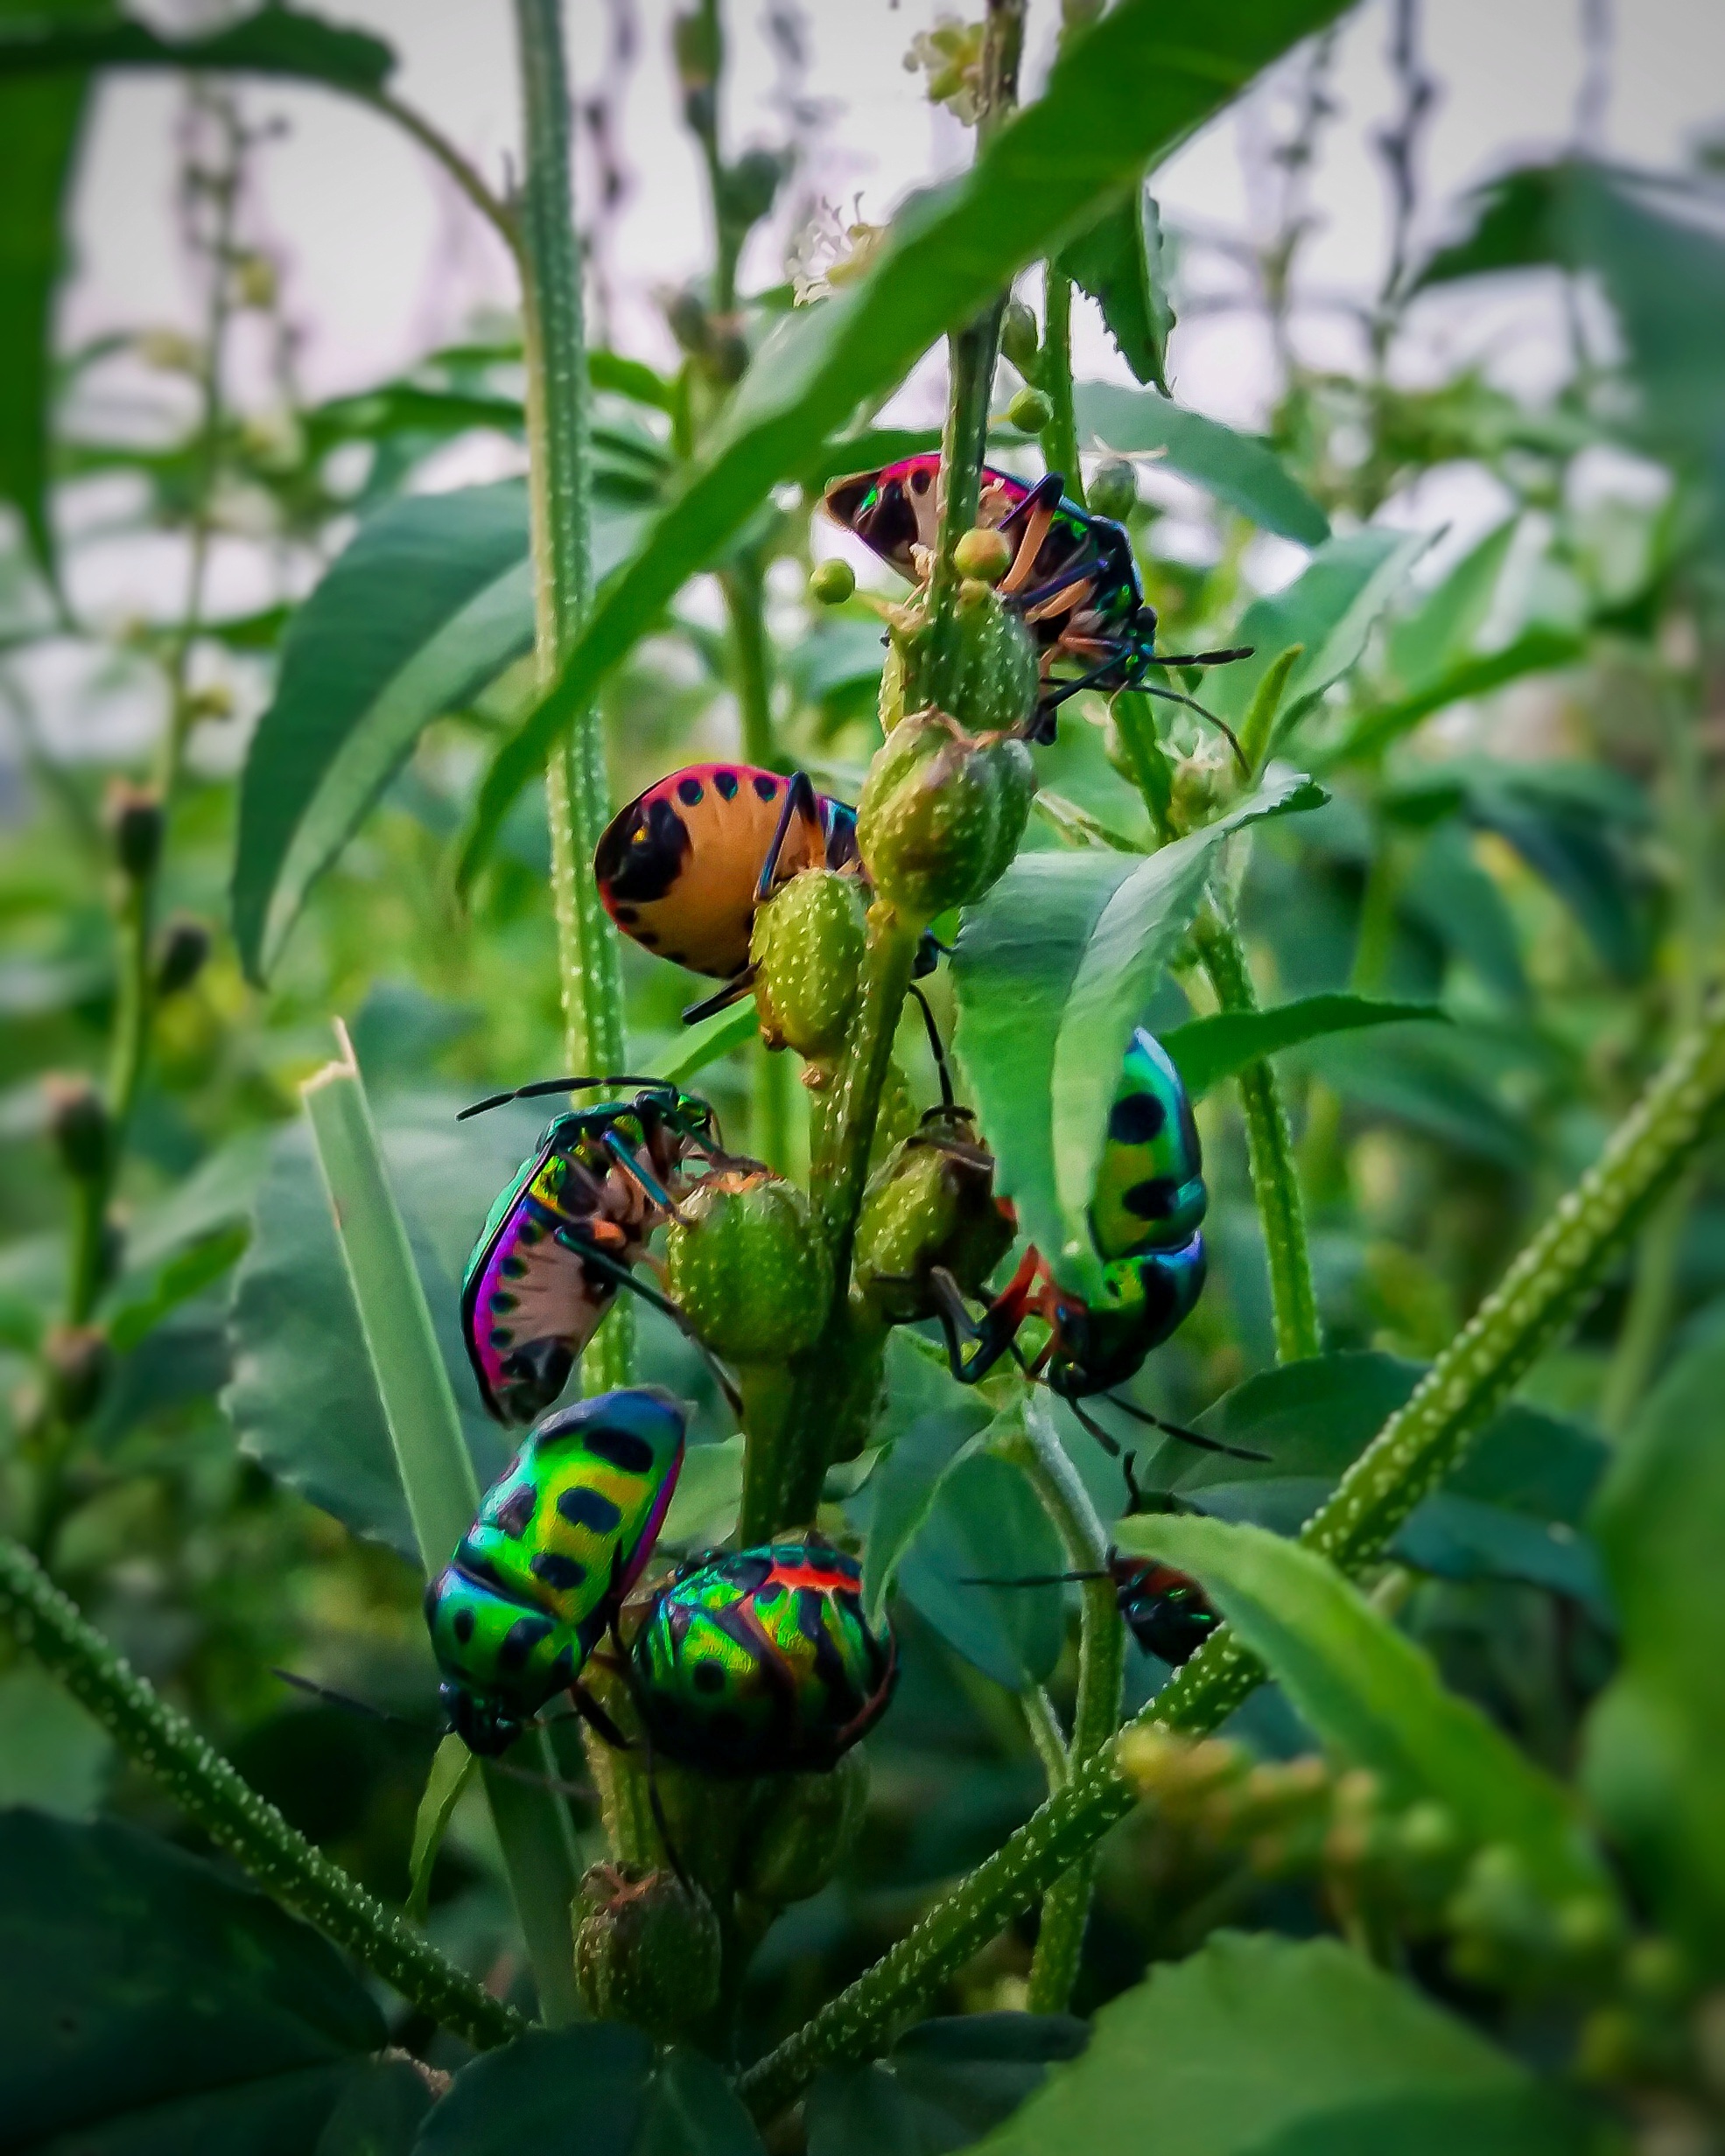 A horde of lady bugs on a plant